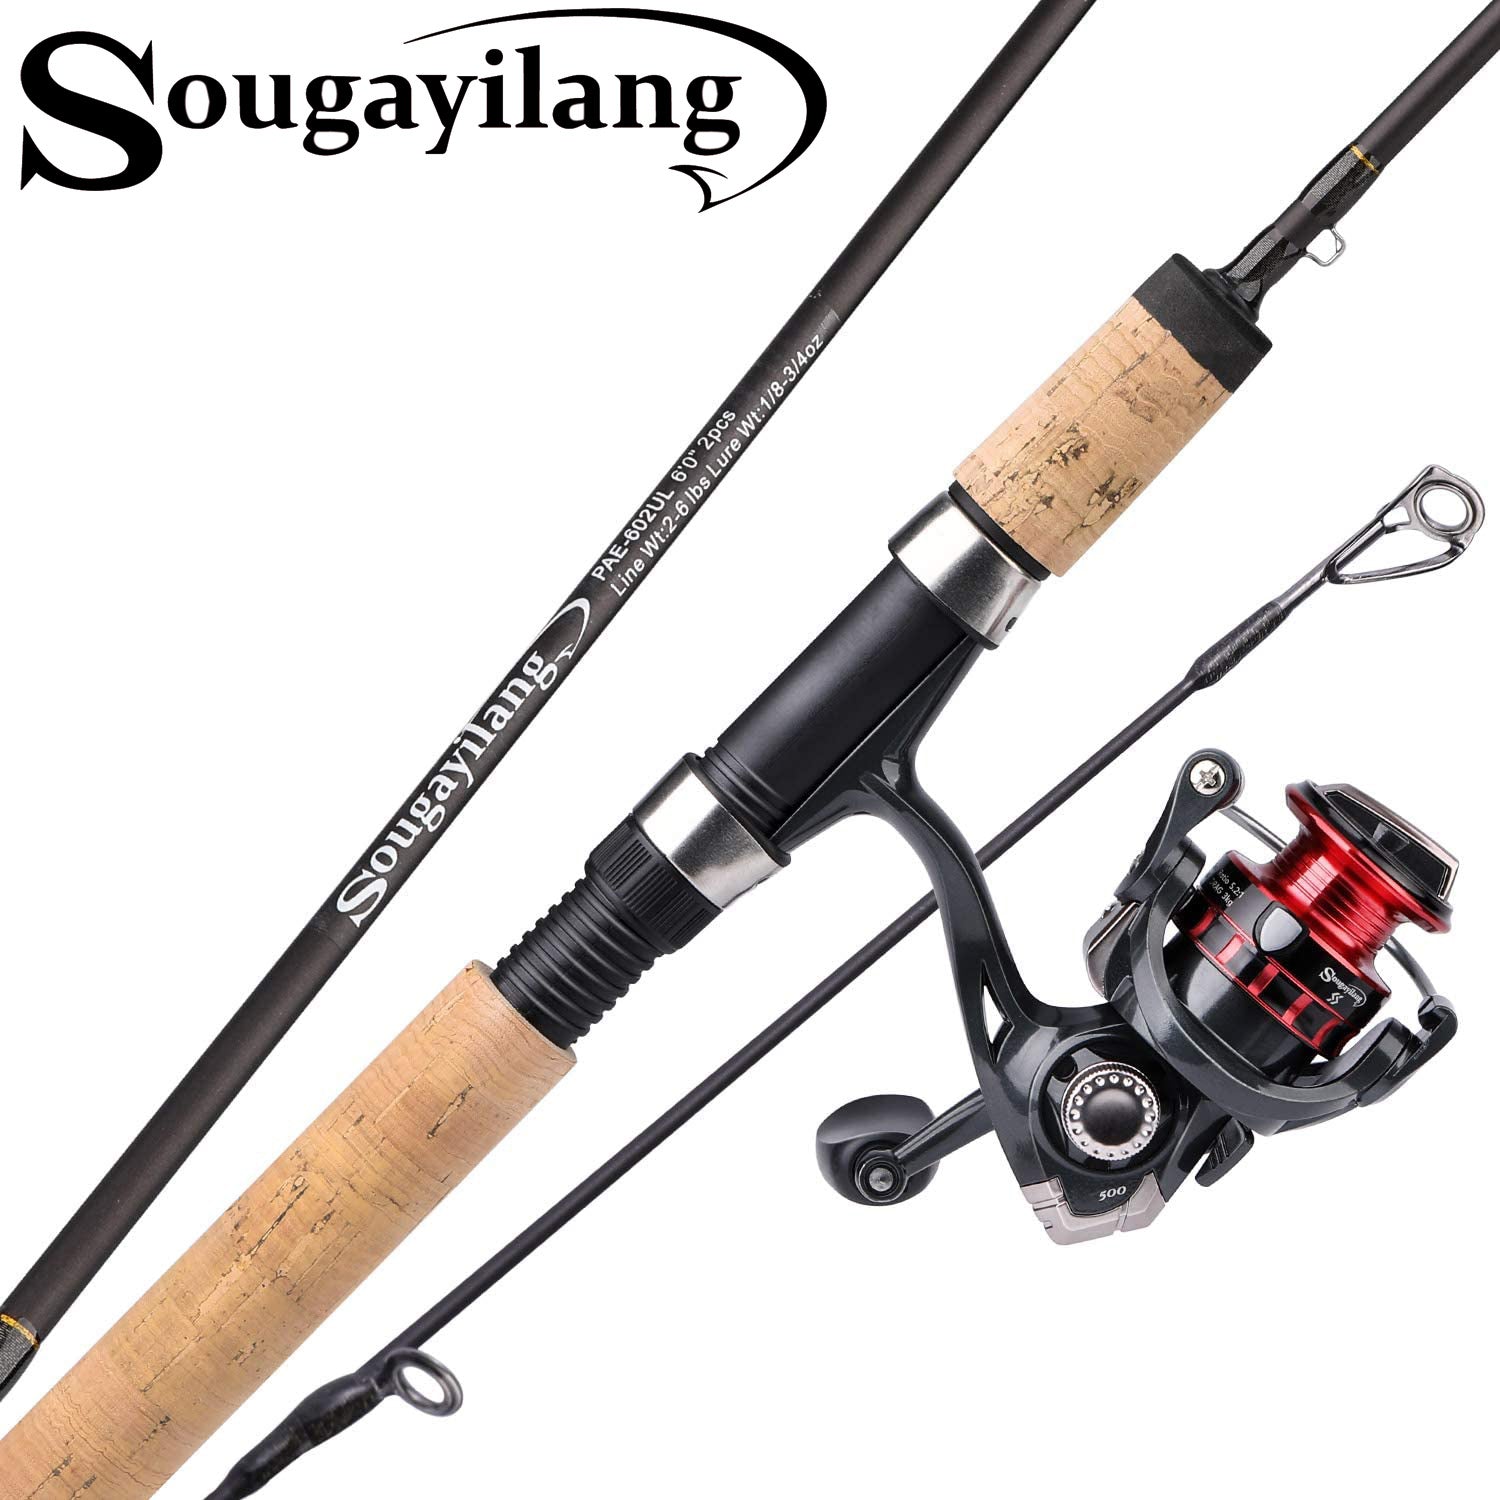 Sougayilang Fishing Rod and Reel Combos,Graphite Blank Rods,Stainless Steel  Guides,2 Piece Spinning Rod Travel 500 Size Spinning Fishing Reel.